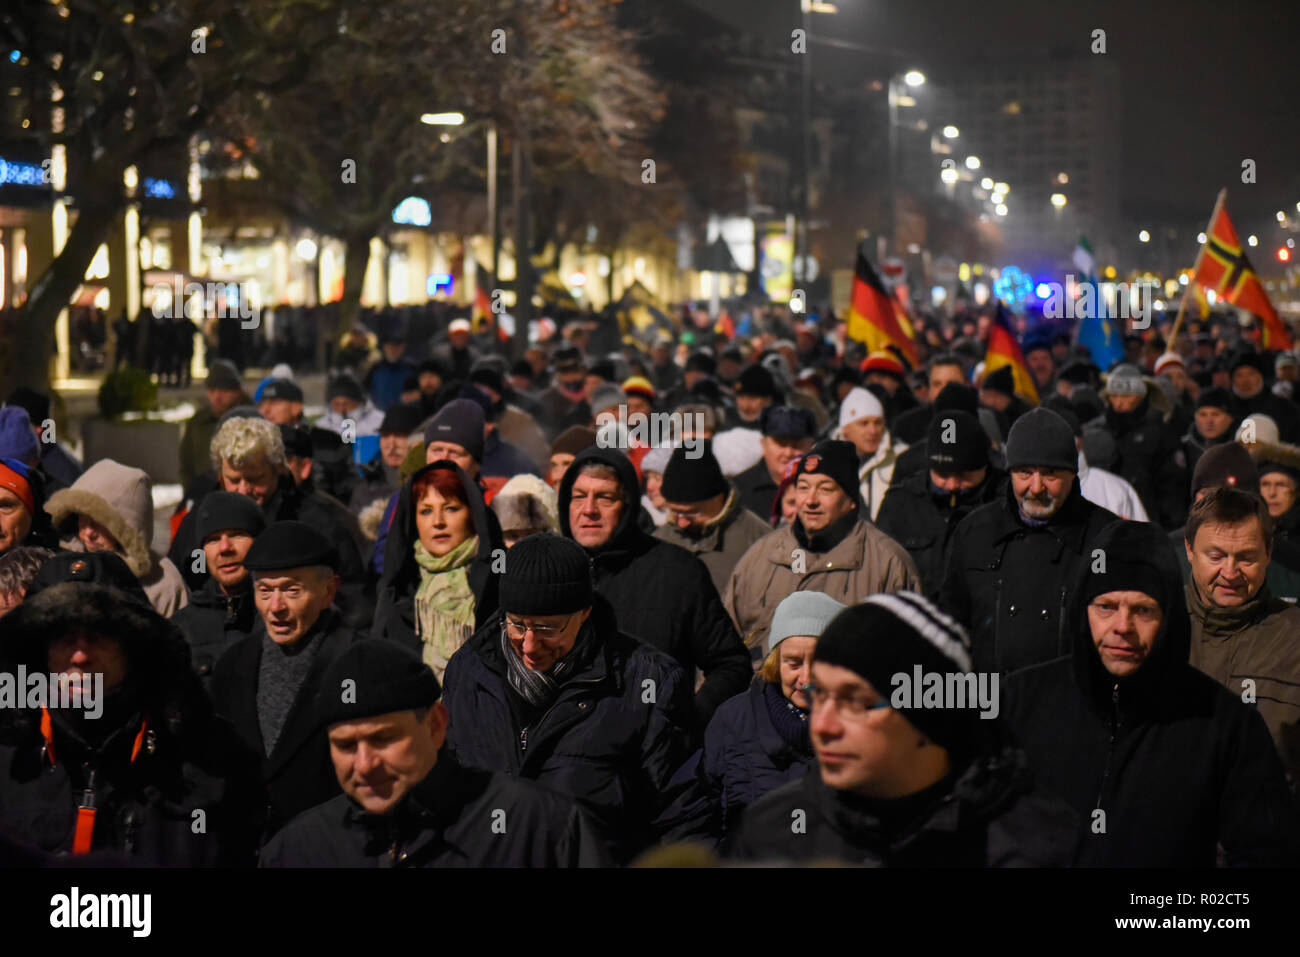 Supporters of Pegida are seen gathered at the Neumarkt Square during the protest. The Pegida (Patriotic Europeans against the Islamization of the West) weekly protest at the Neumarkt Square. Stock Photo